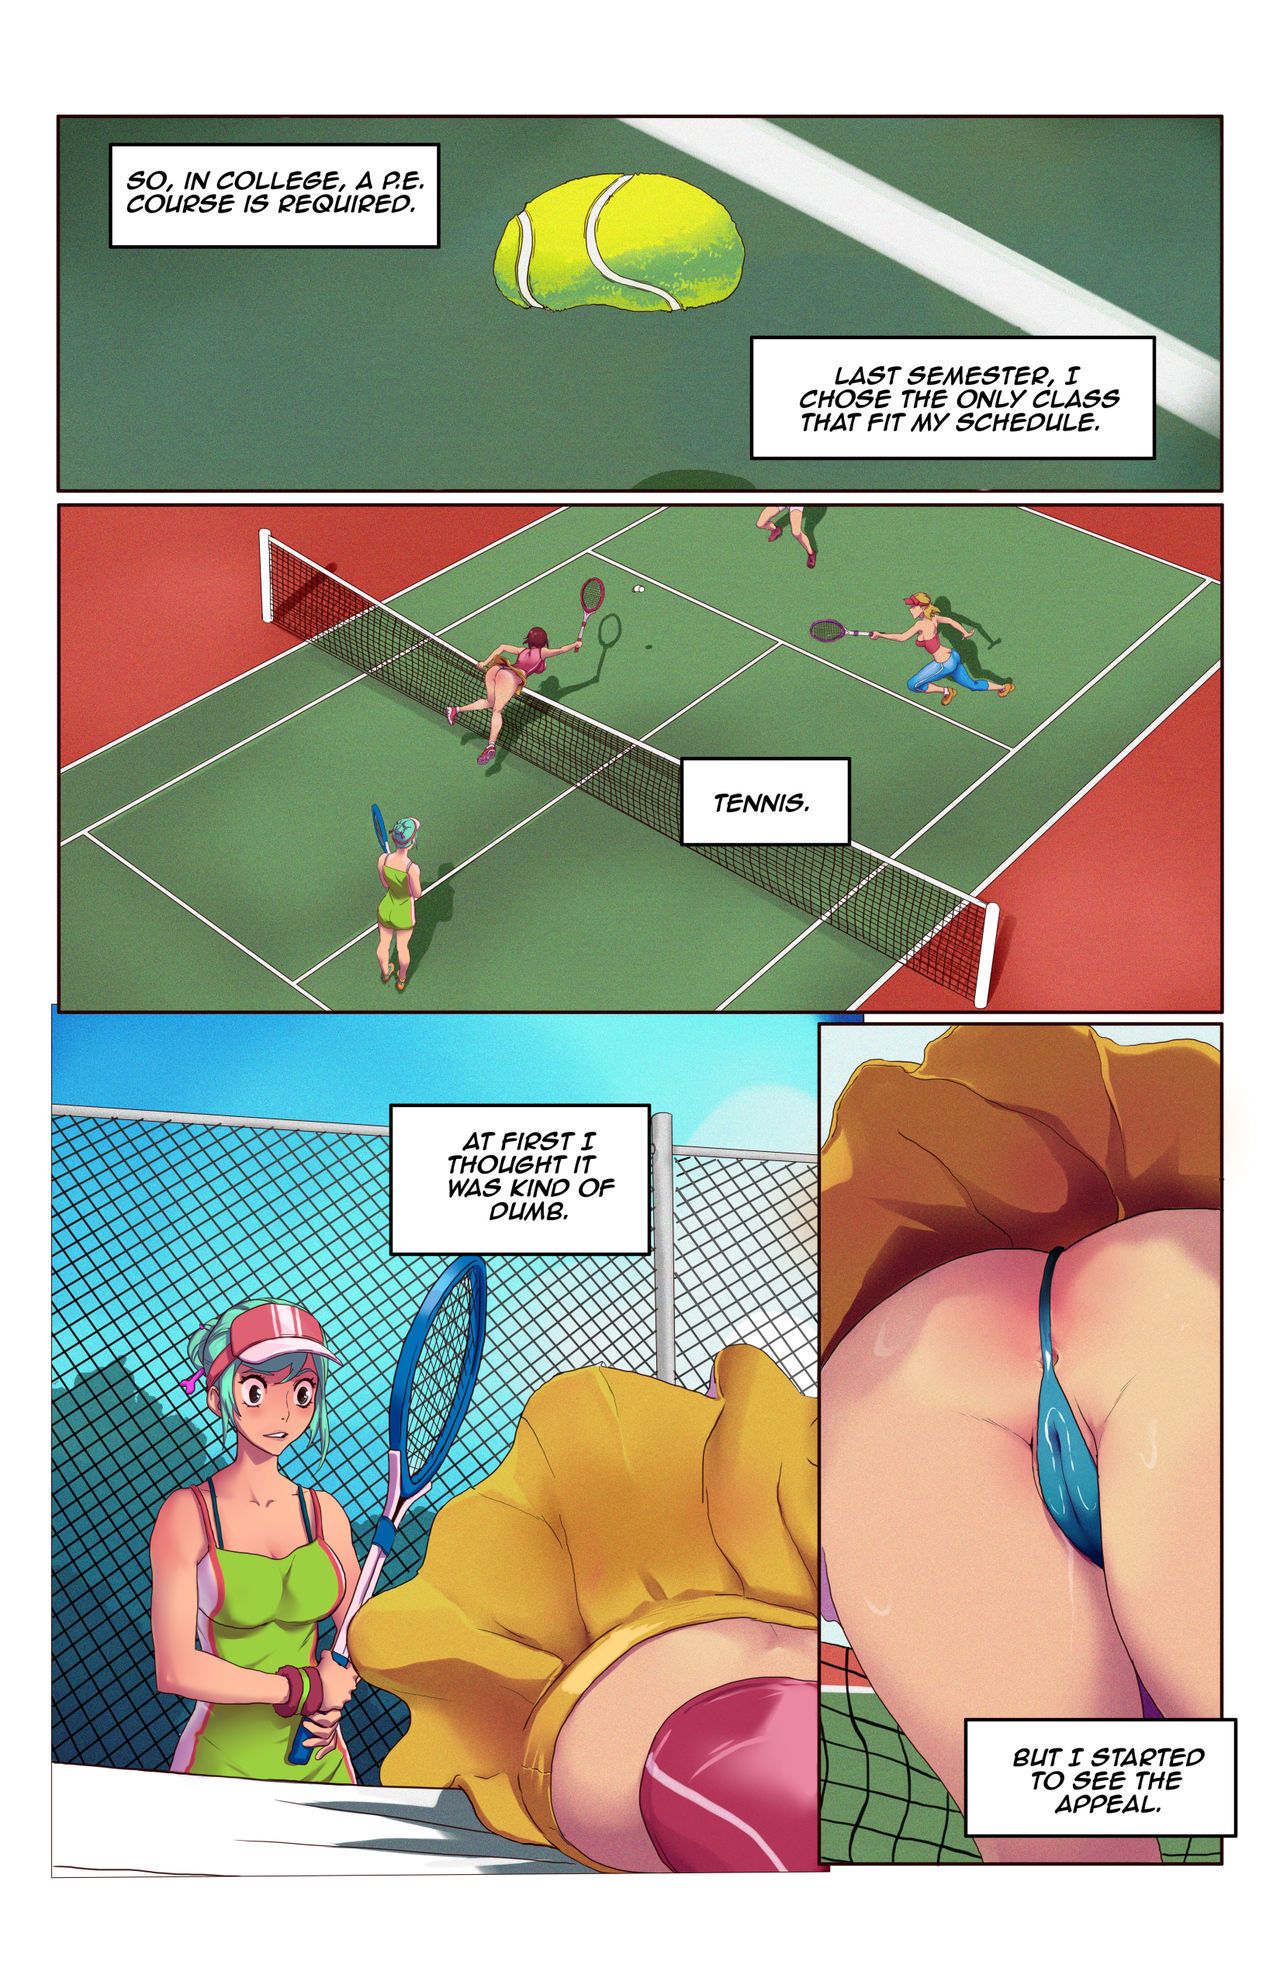 Time Stop and bop - Tennis [Tentacle monster chu] 1